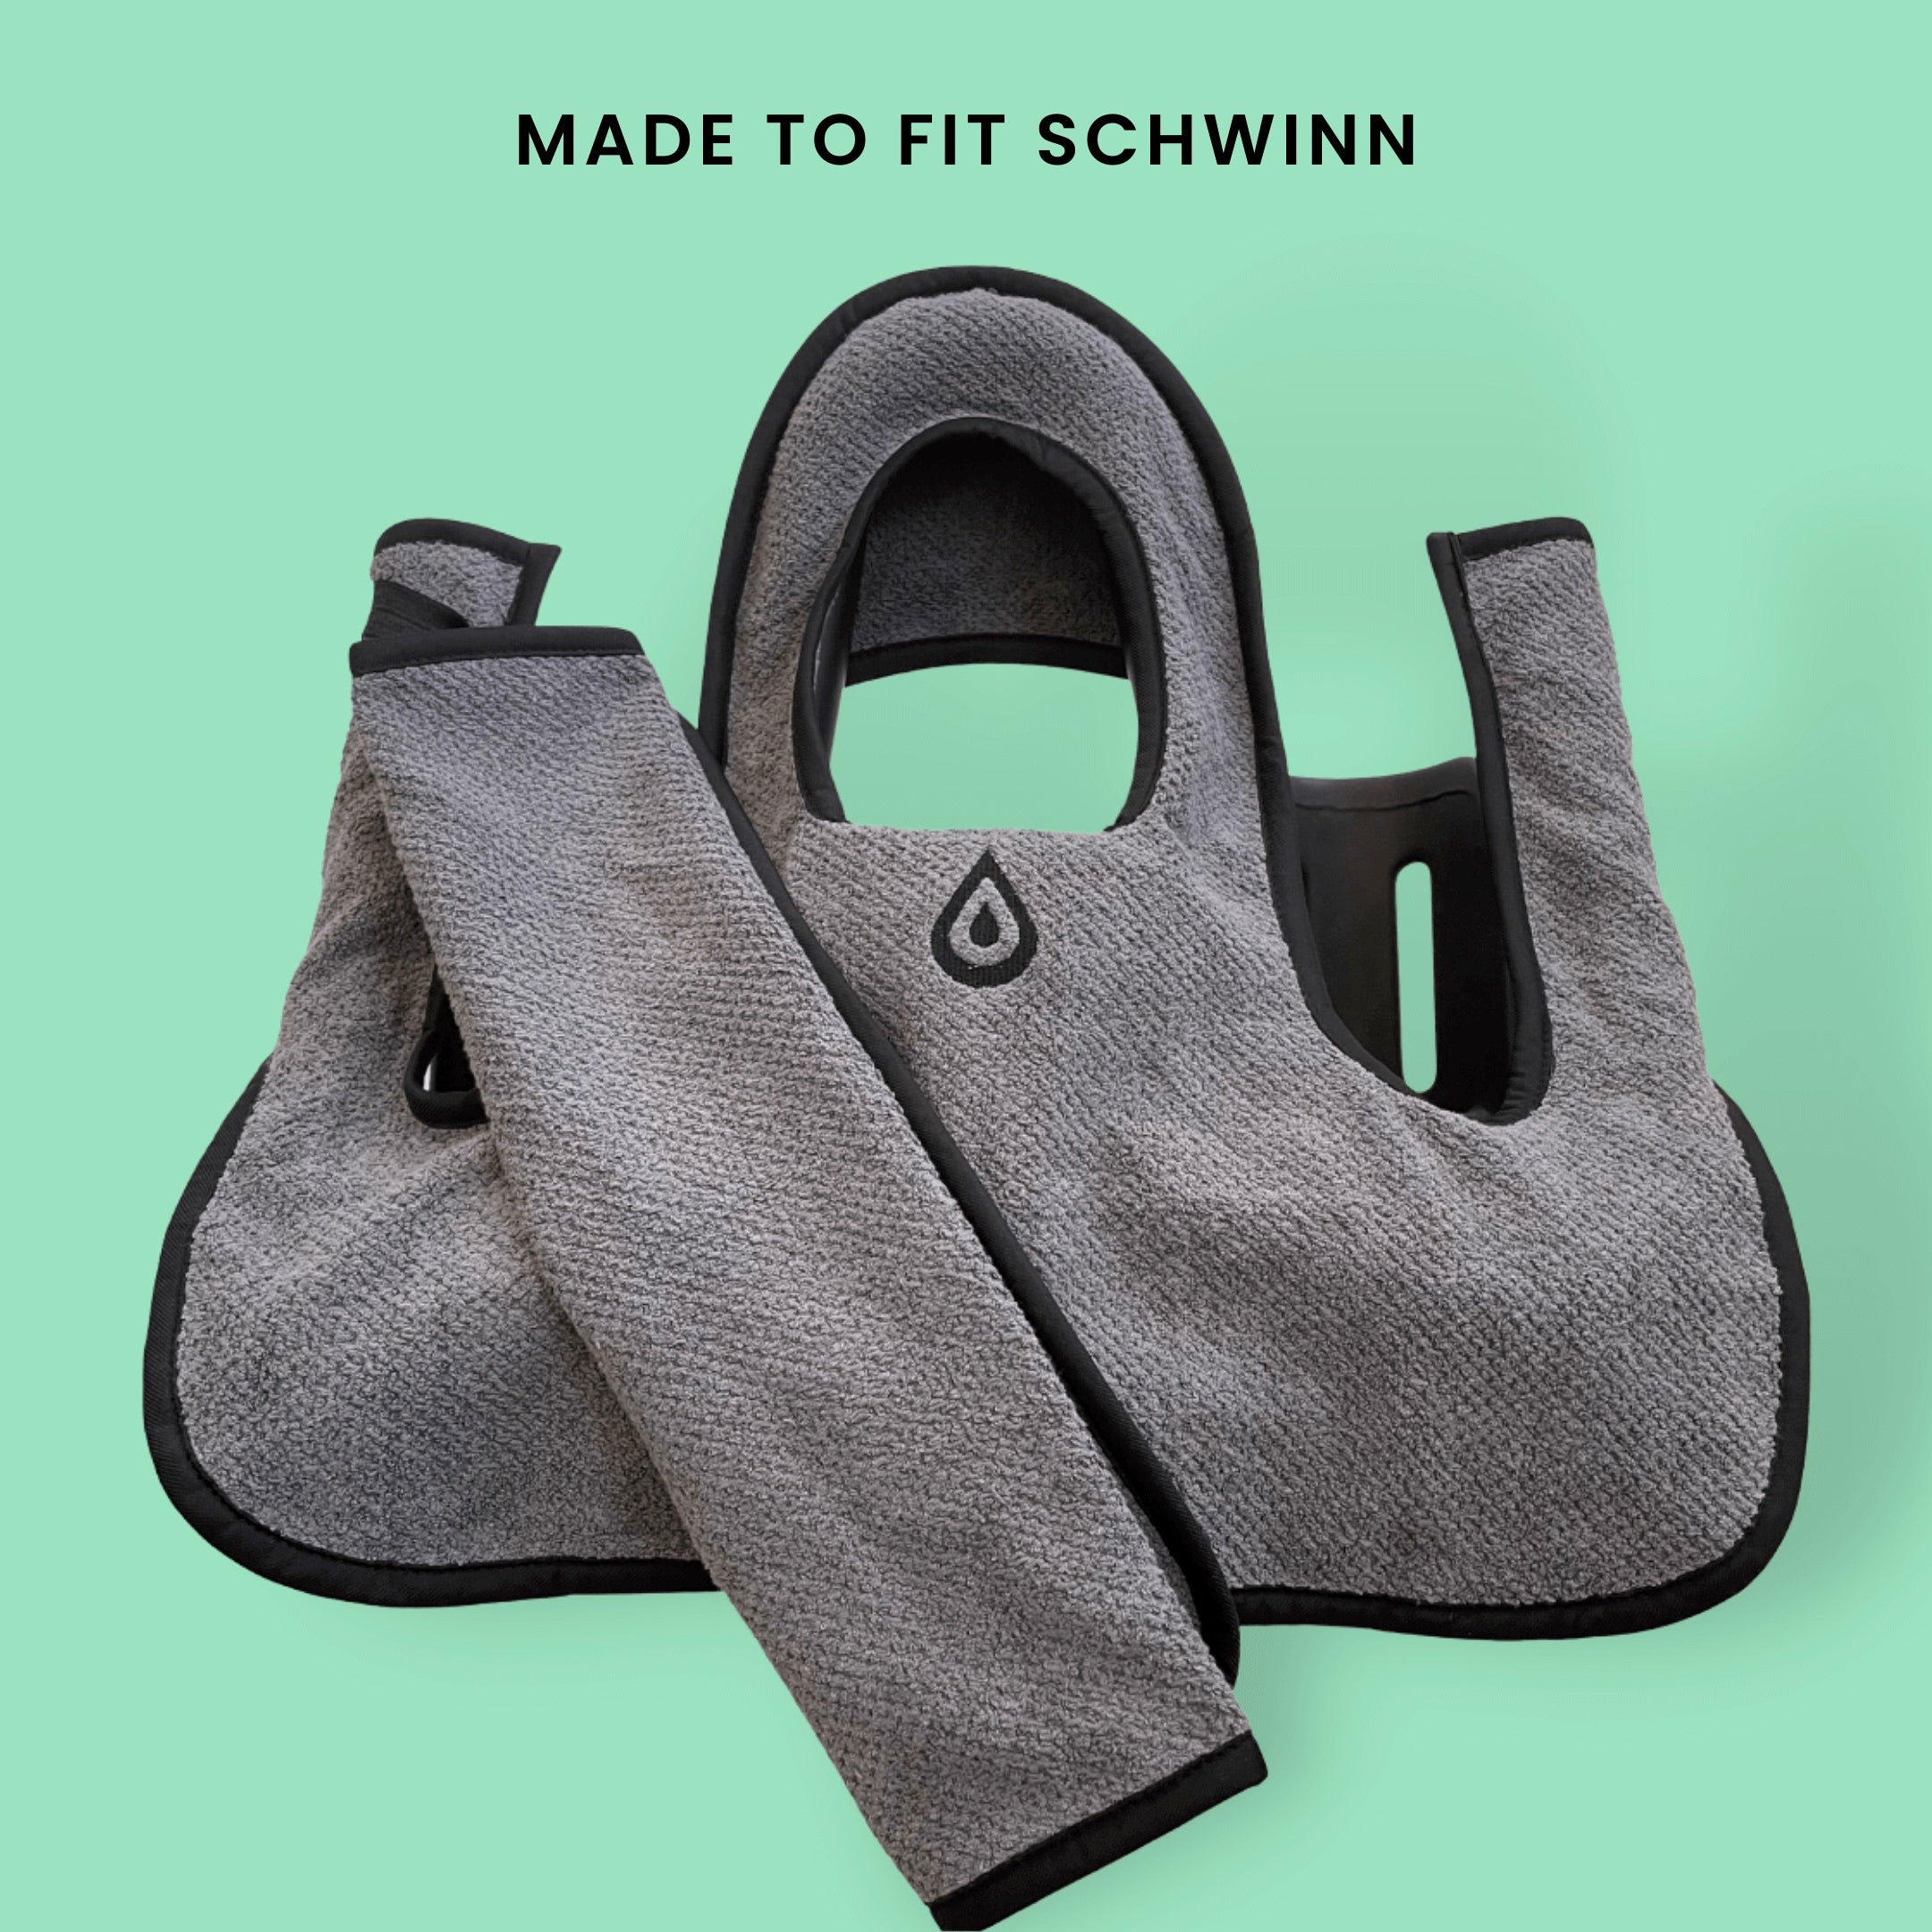 For use with Schwinn equipment